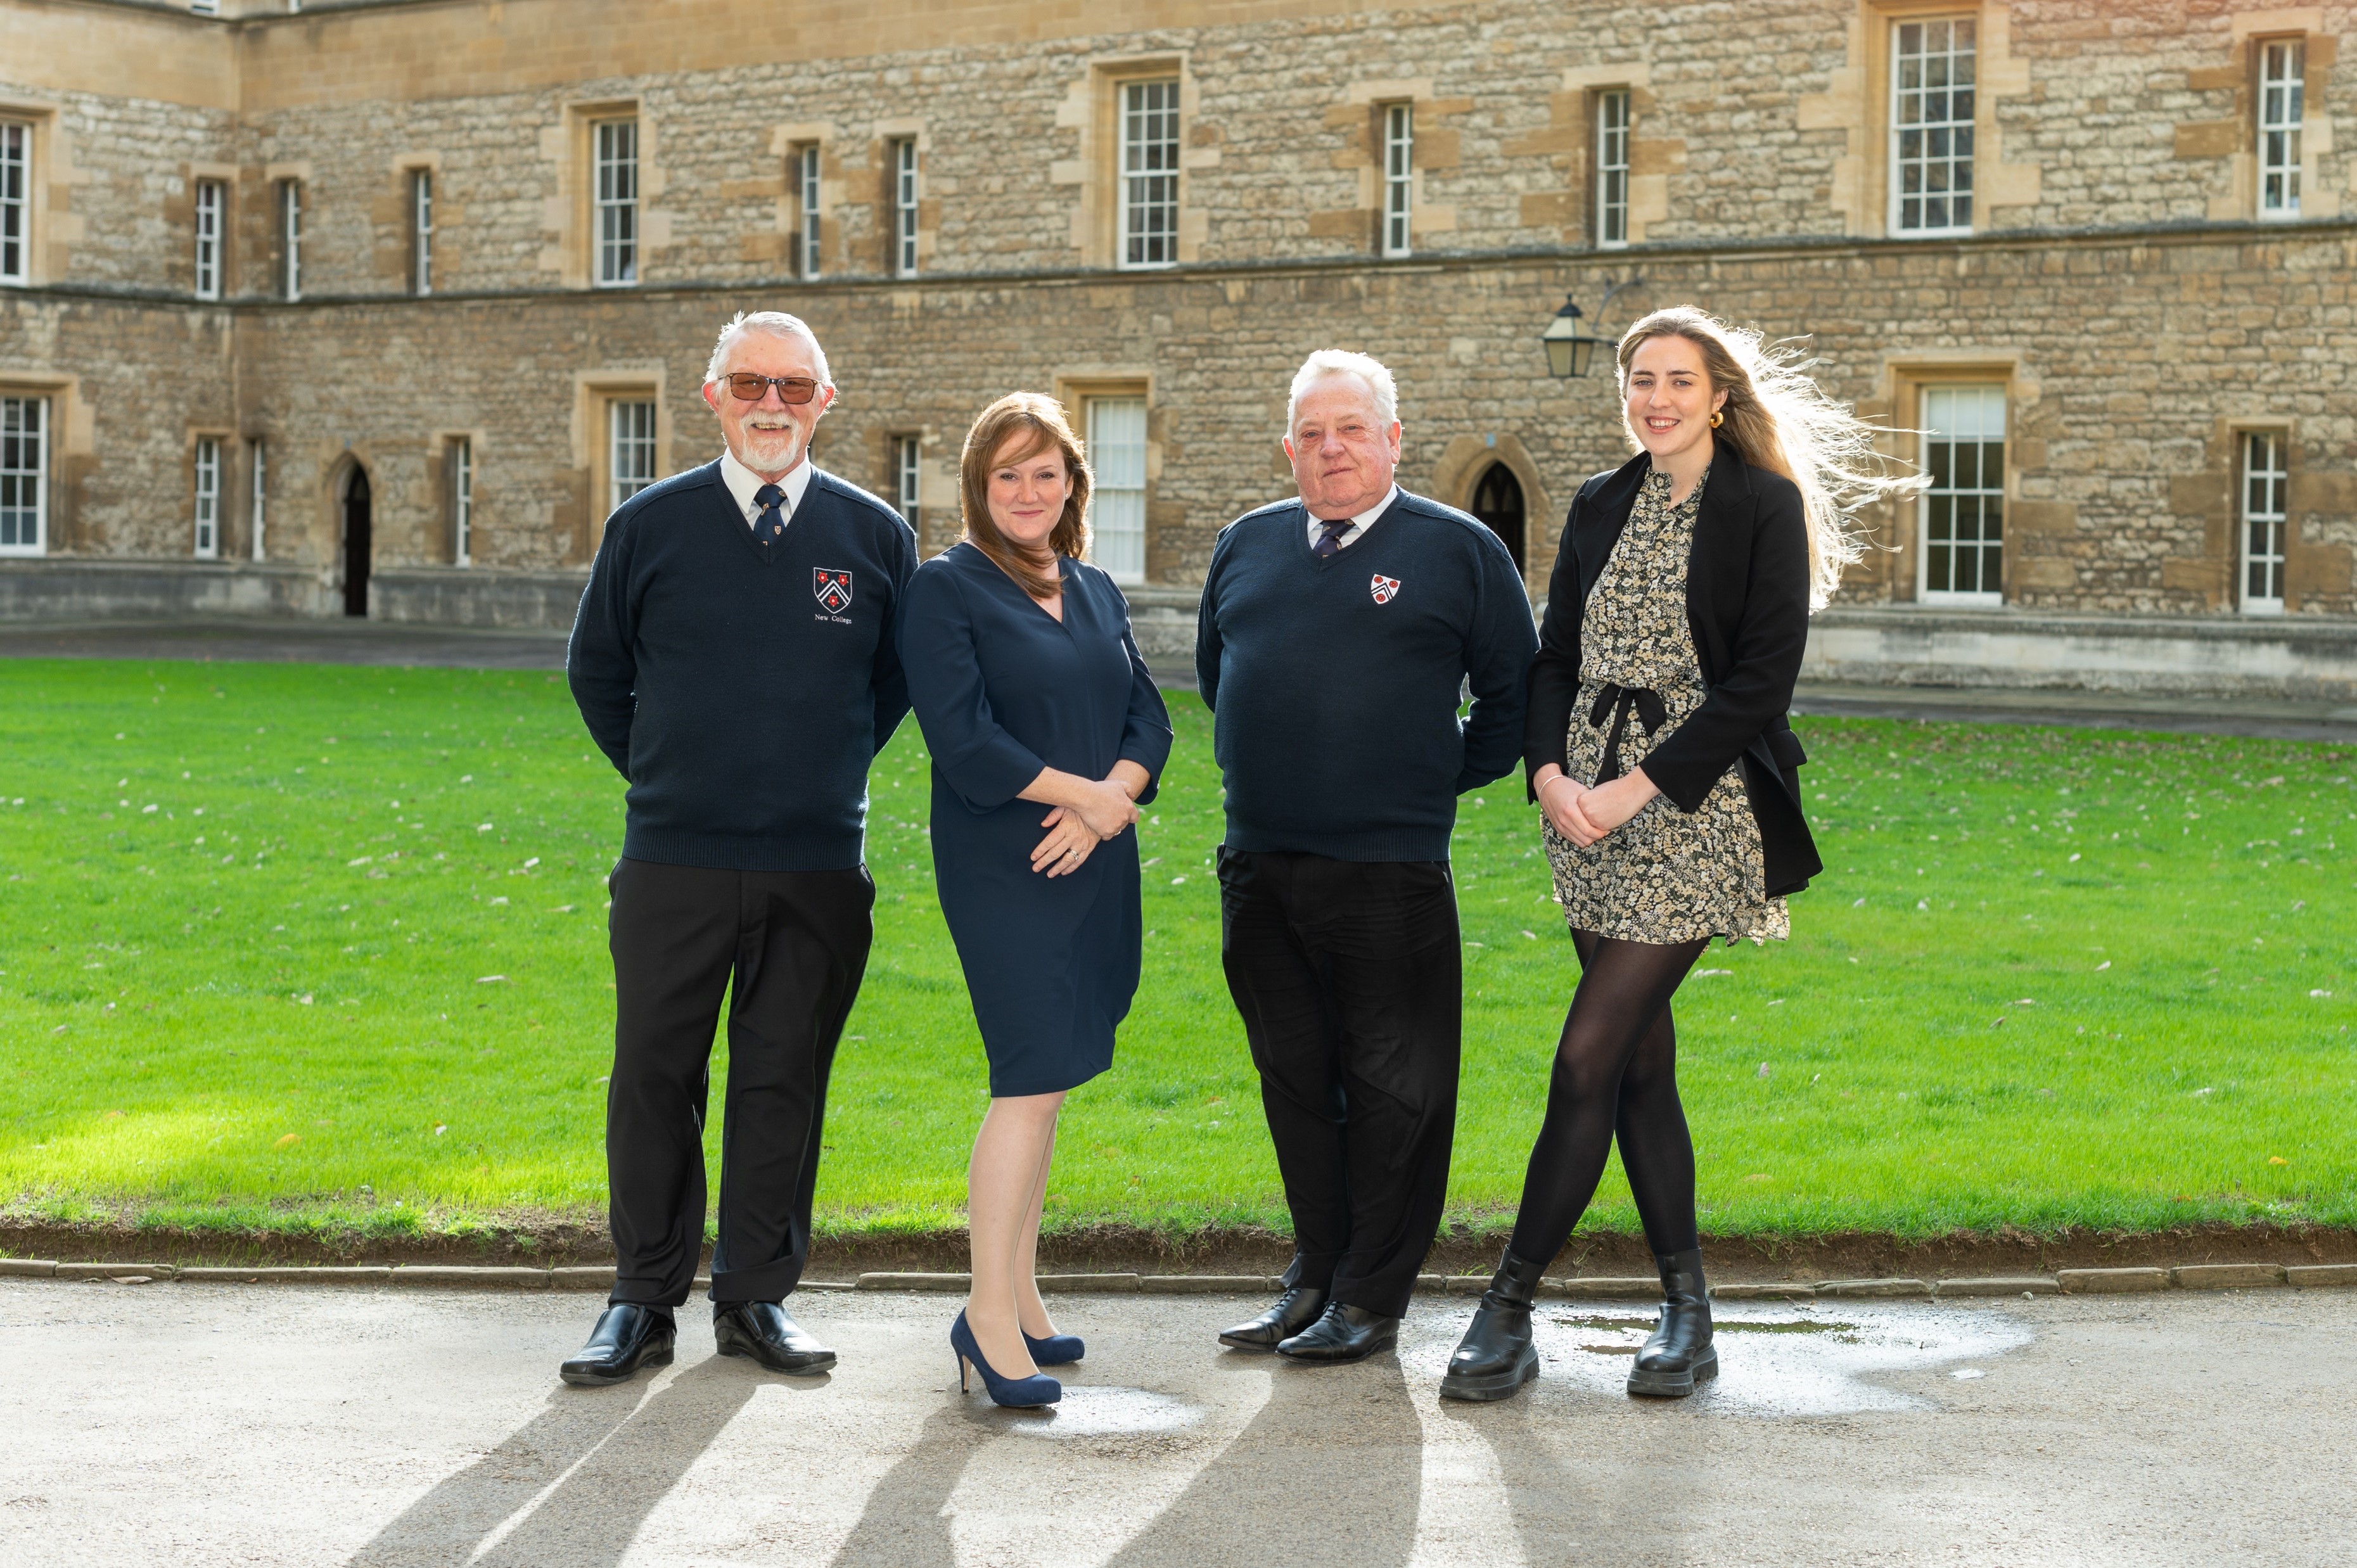 The Visitor Liaison team in the Front Quad